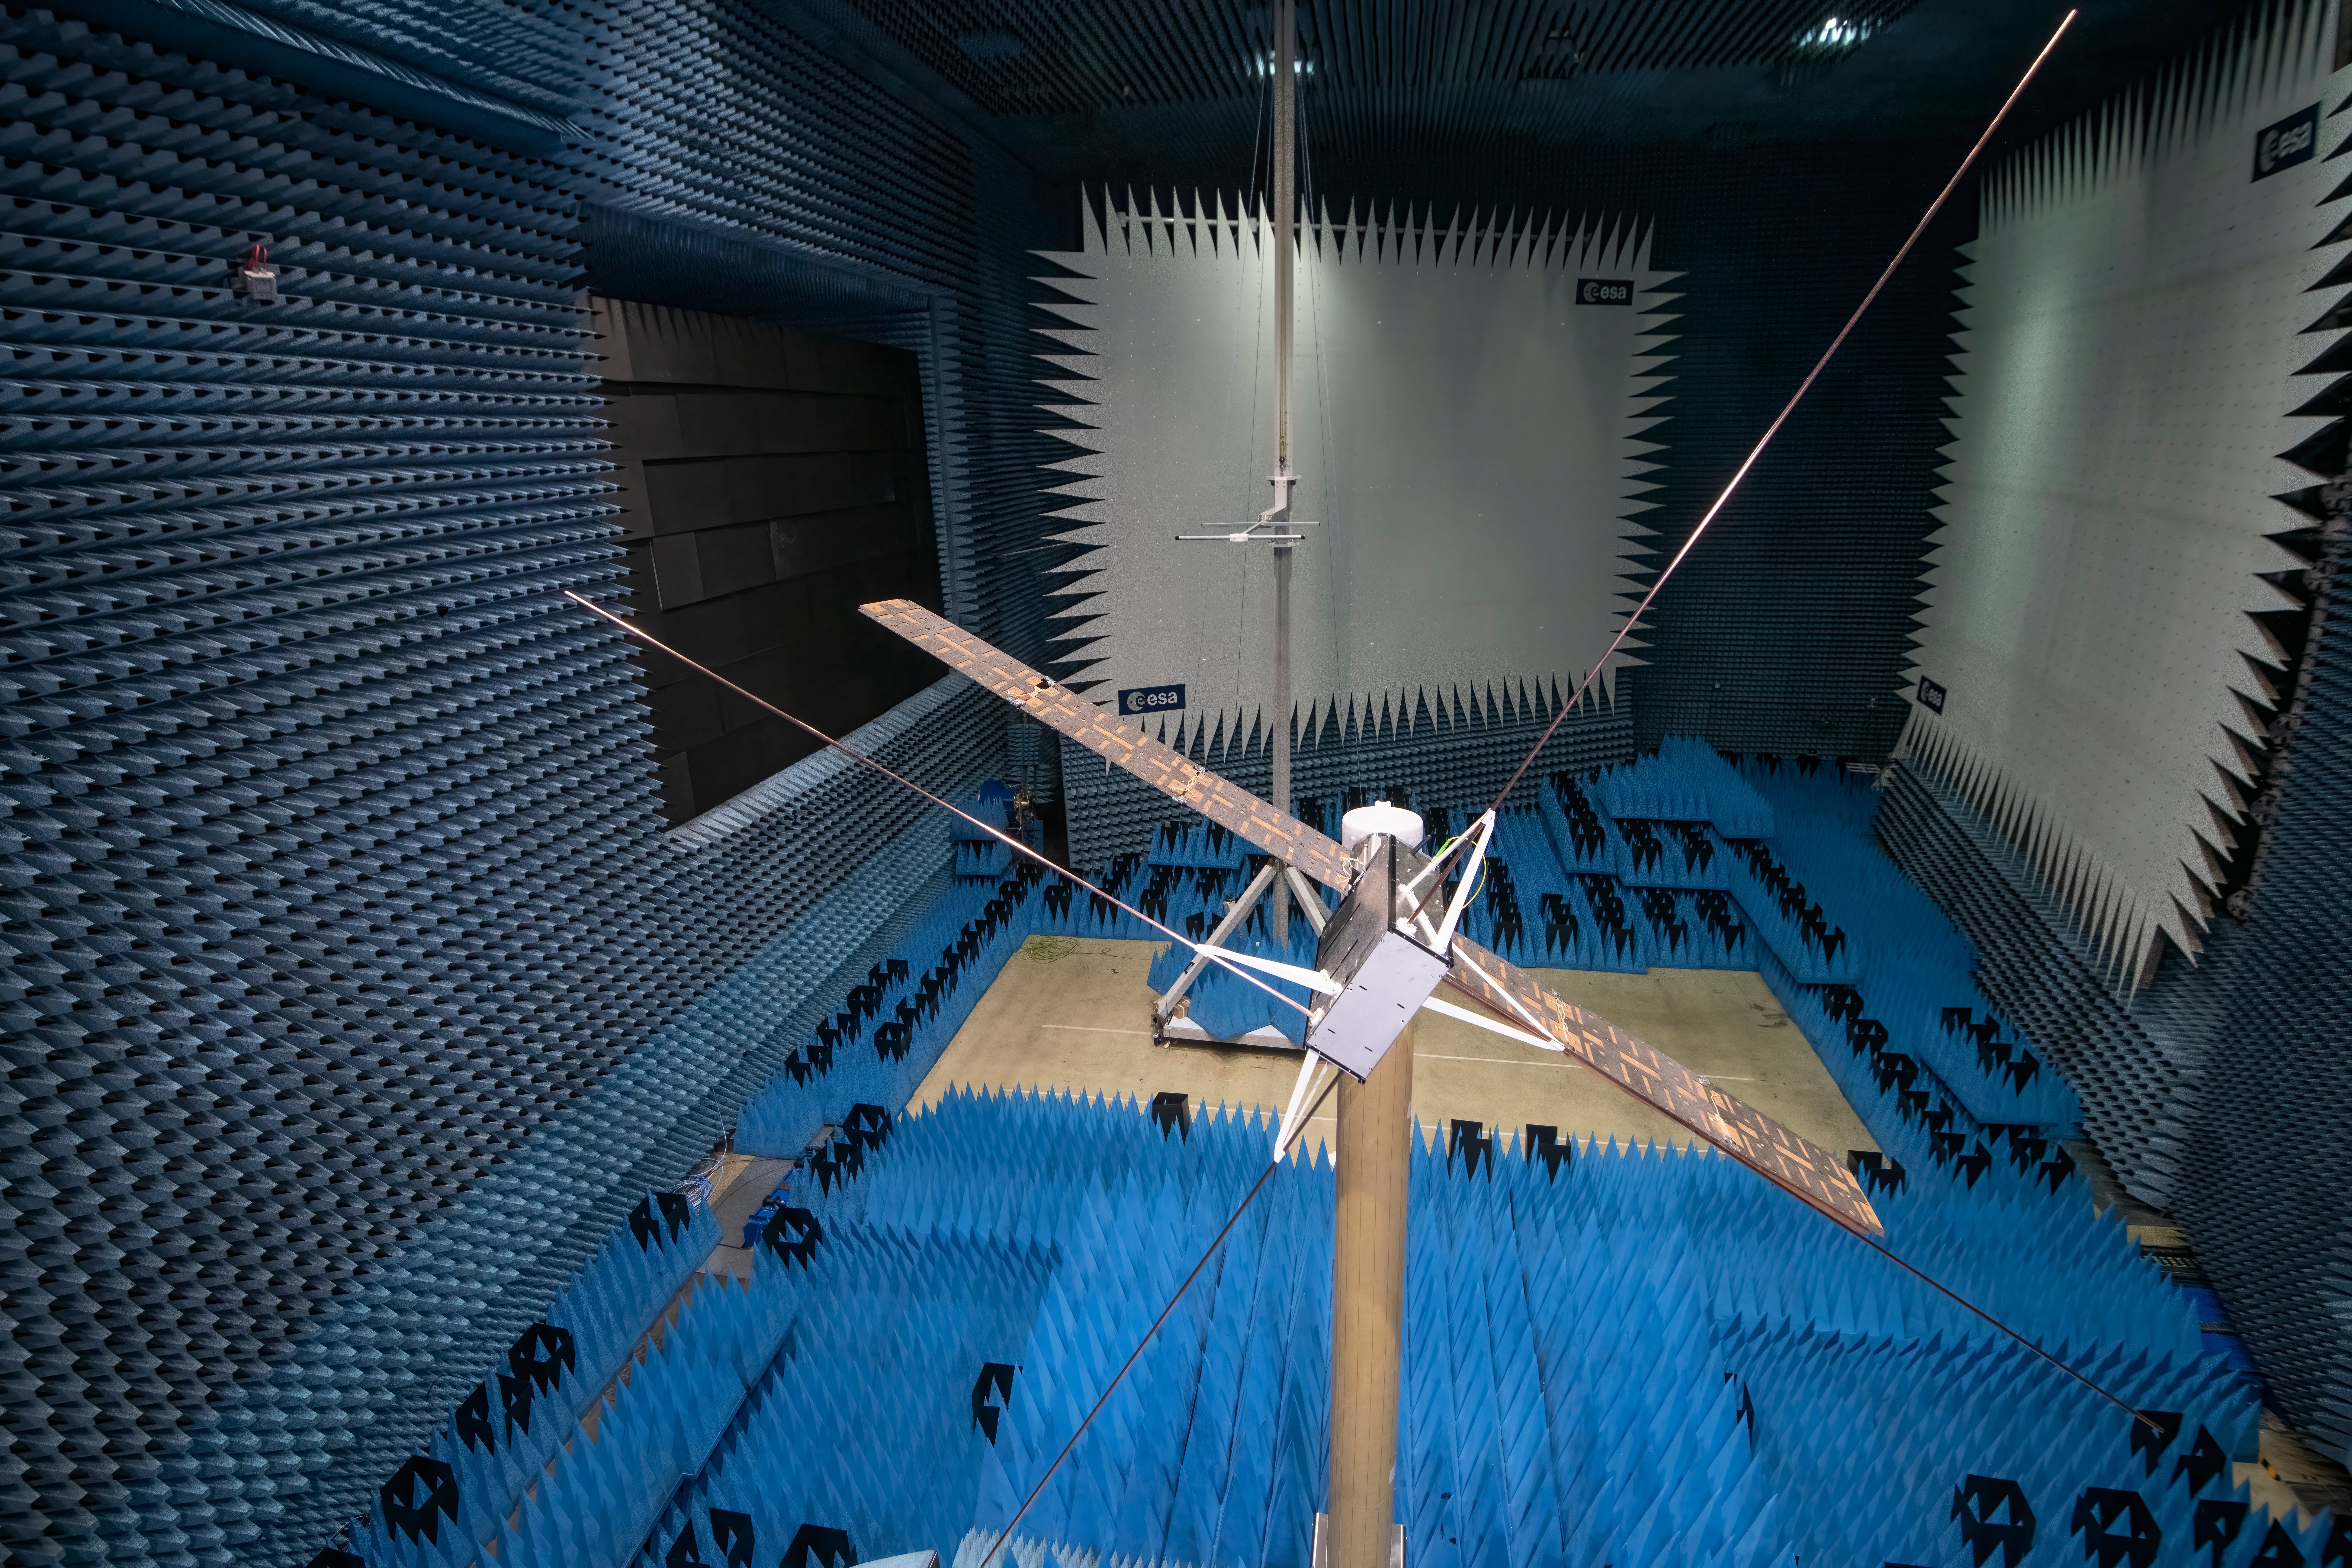 The Juventas CubeSat (and it's antenna array) being tested in November 2021. (Image: ESA-P. de Maagt)